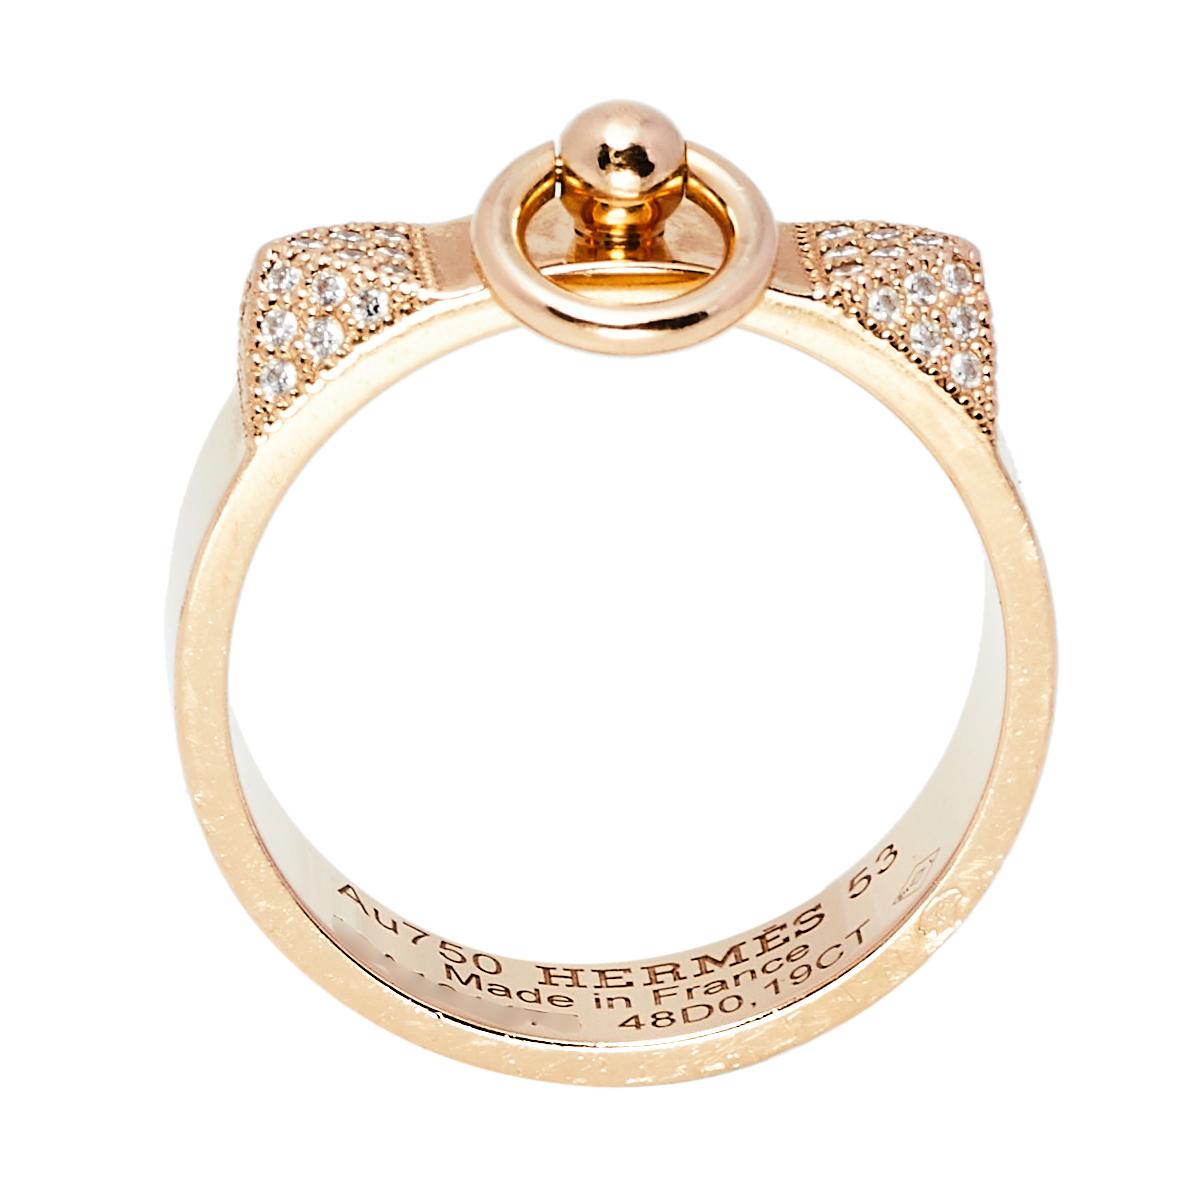 The iconic Collier de Chien collection by Hermes is from 1949. We have here a fine jewelry Collier de Chien ring that's made from 18k rose gold and the signature studs are embellished with diamonds. It's a sparkling jewel you'll treasure.

